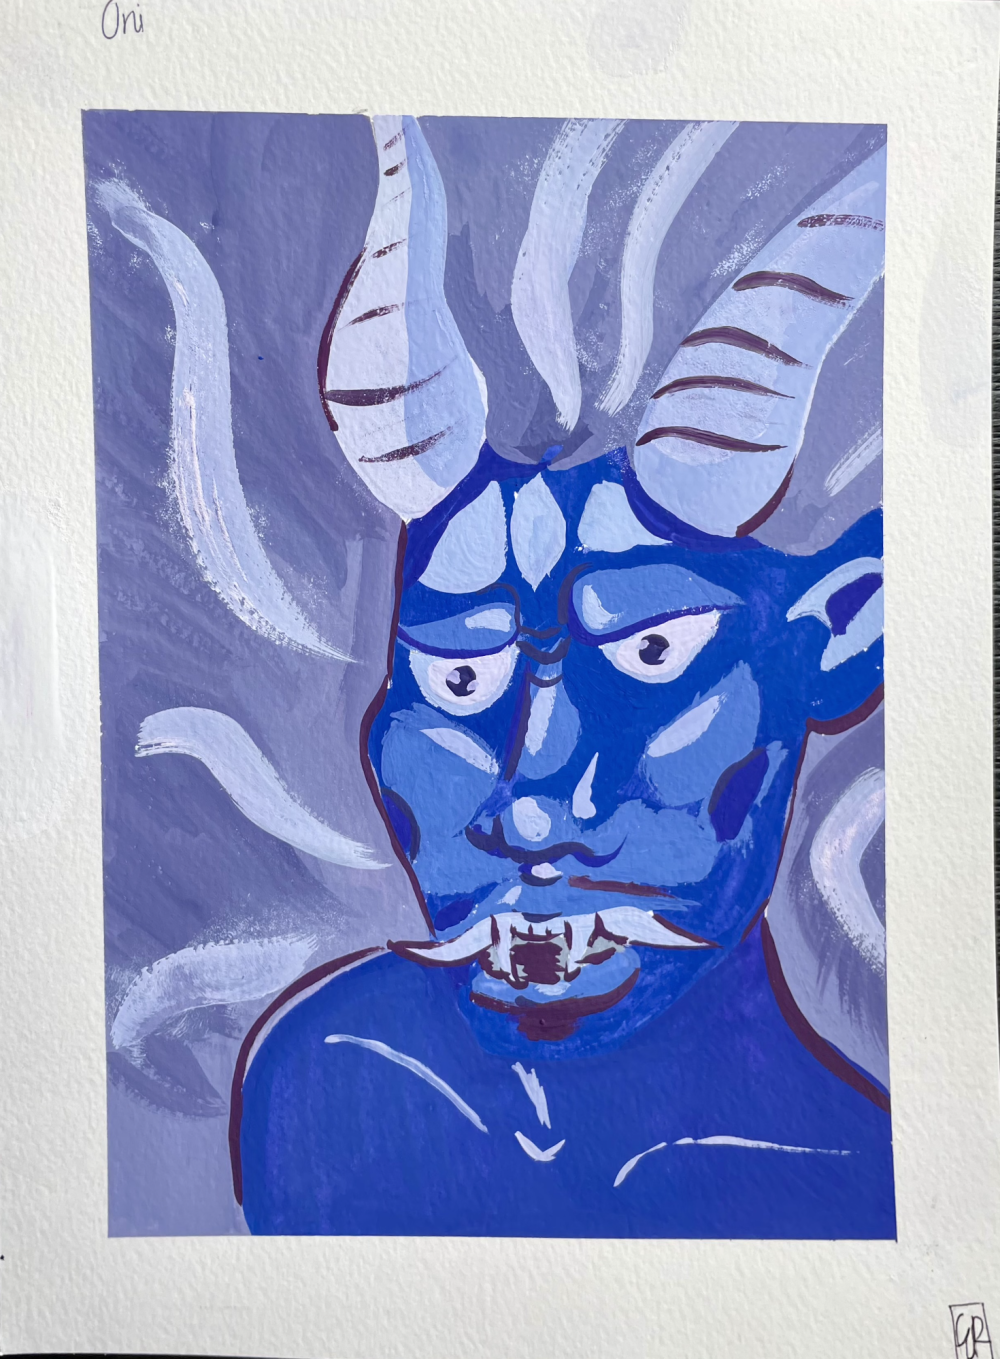 A painting in monochromatic values, consisting of violets, blues and lavenders. The colors layer to show a depiction of a mythical beast known as an “Oni”, often in Japanese folklore.